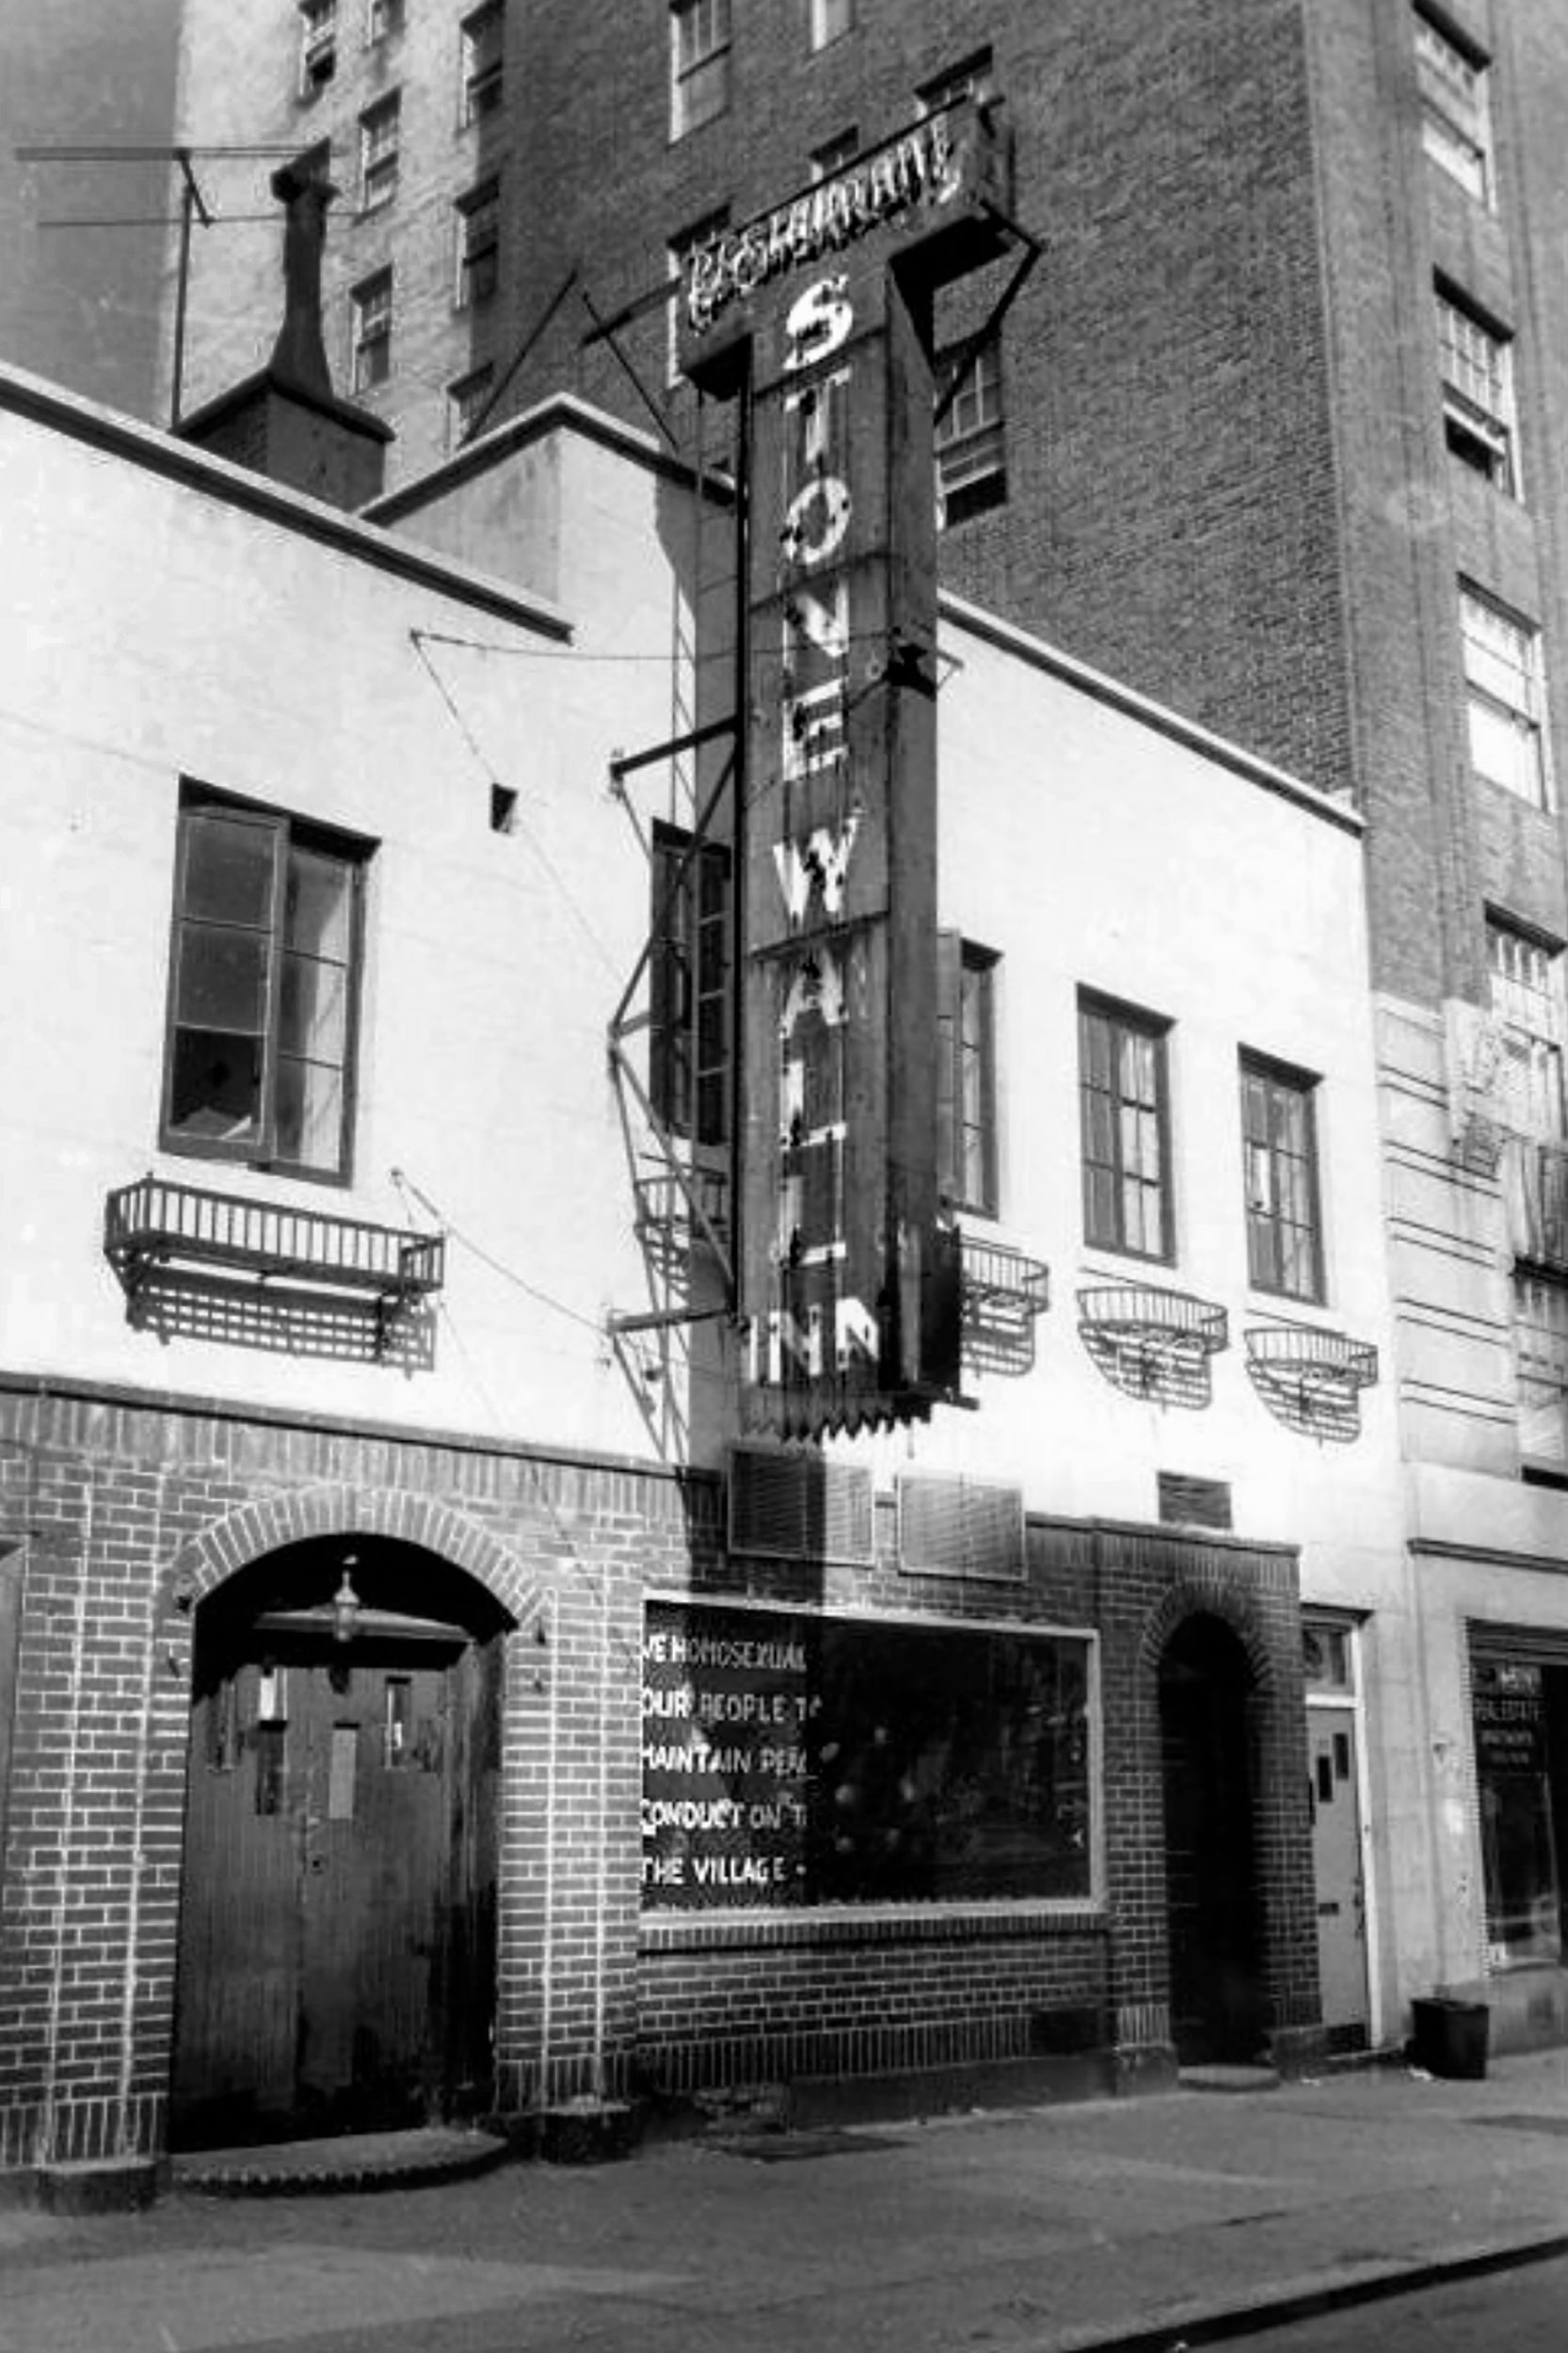 The Stonewall Inn in 1969.